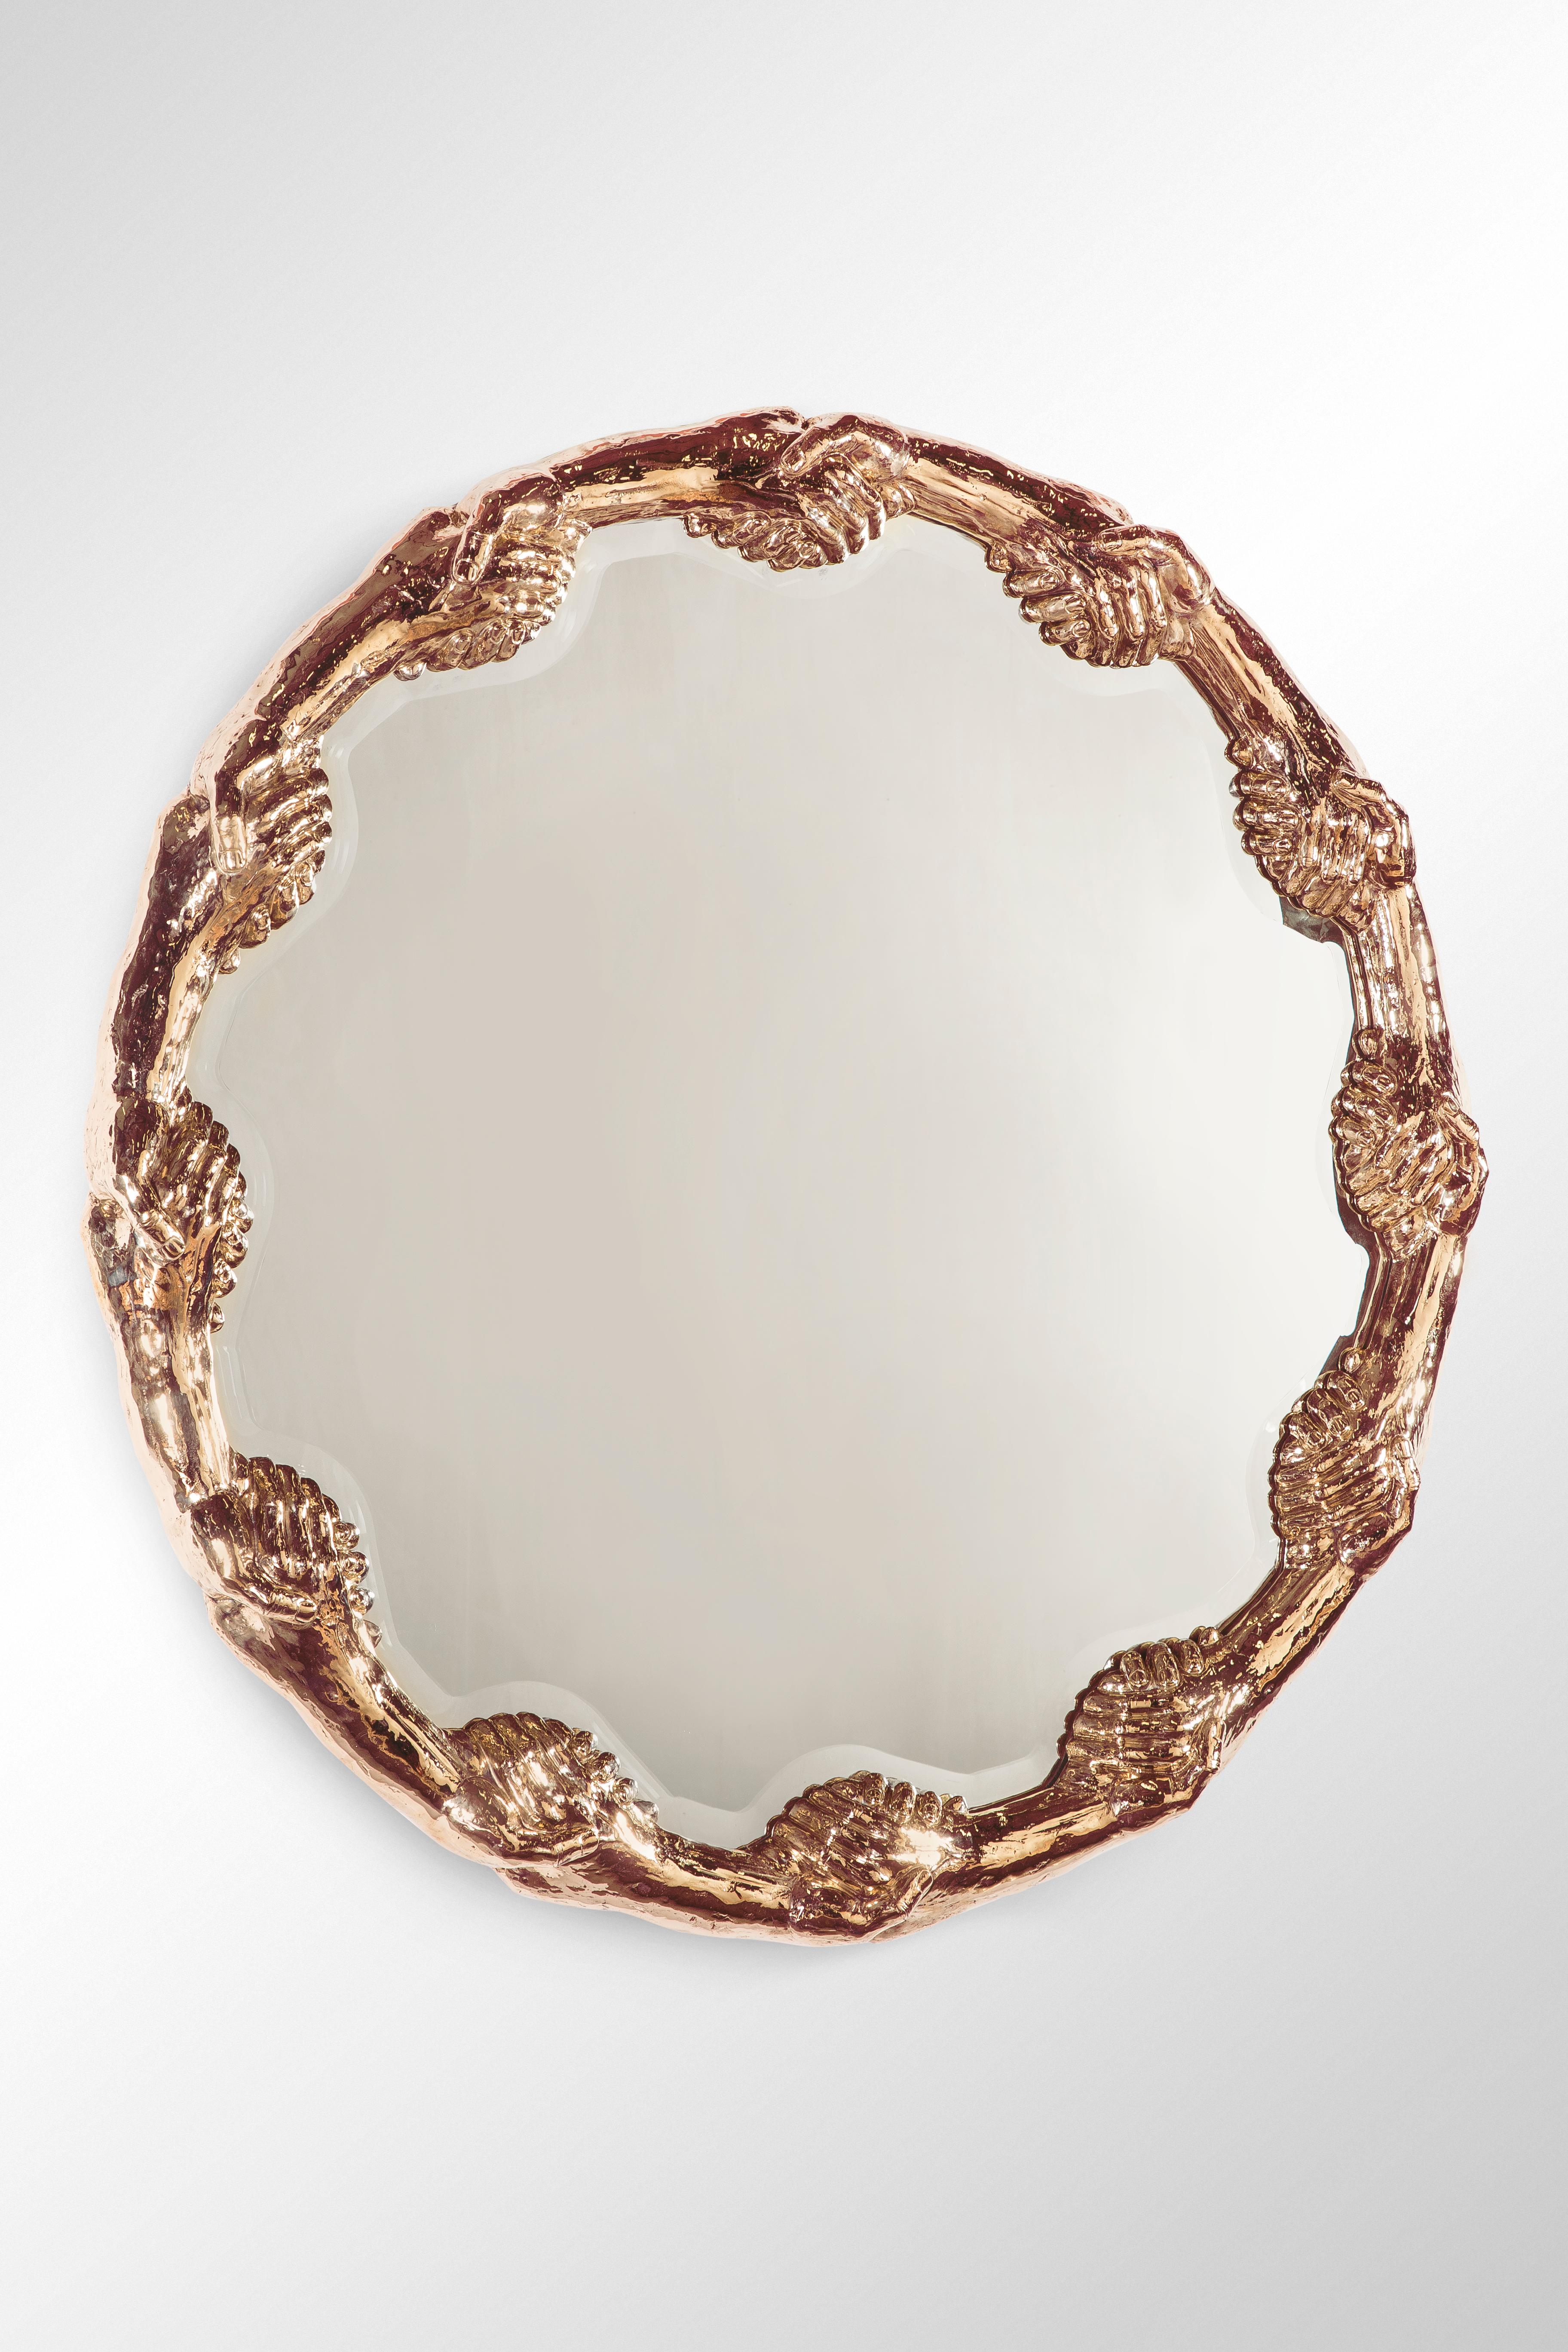 Mirror made of polished bronze, which represents a circle of hands gripping each other in endless promises and their consequences.
This unique and limited edition piece was presented for the first time on the occasion of Studio Job's 